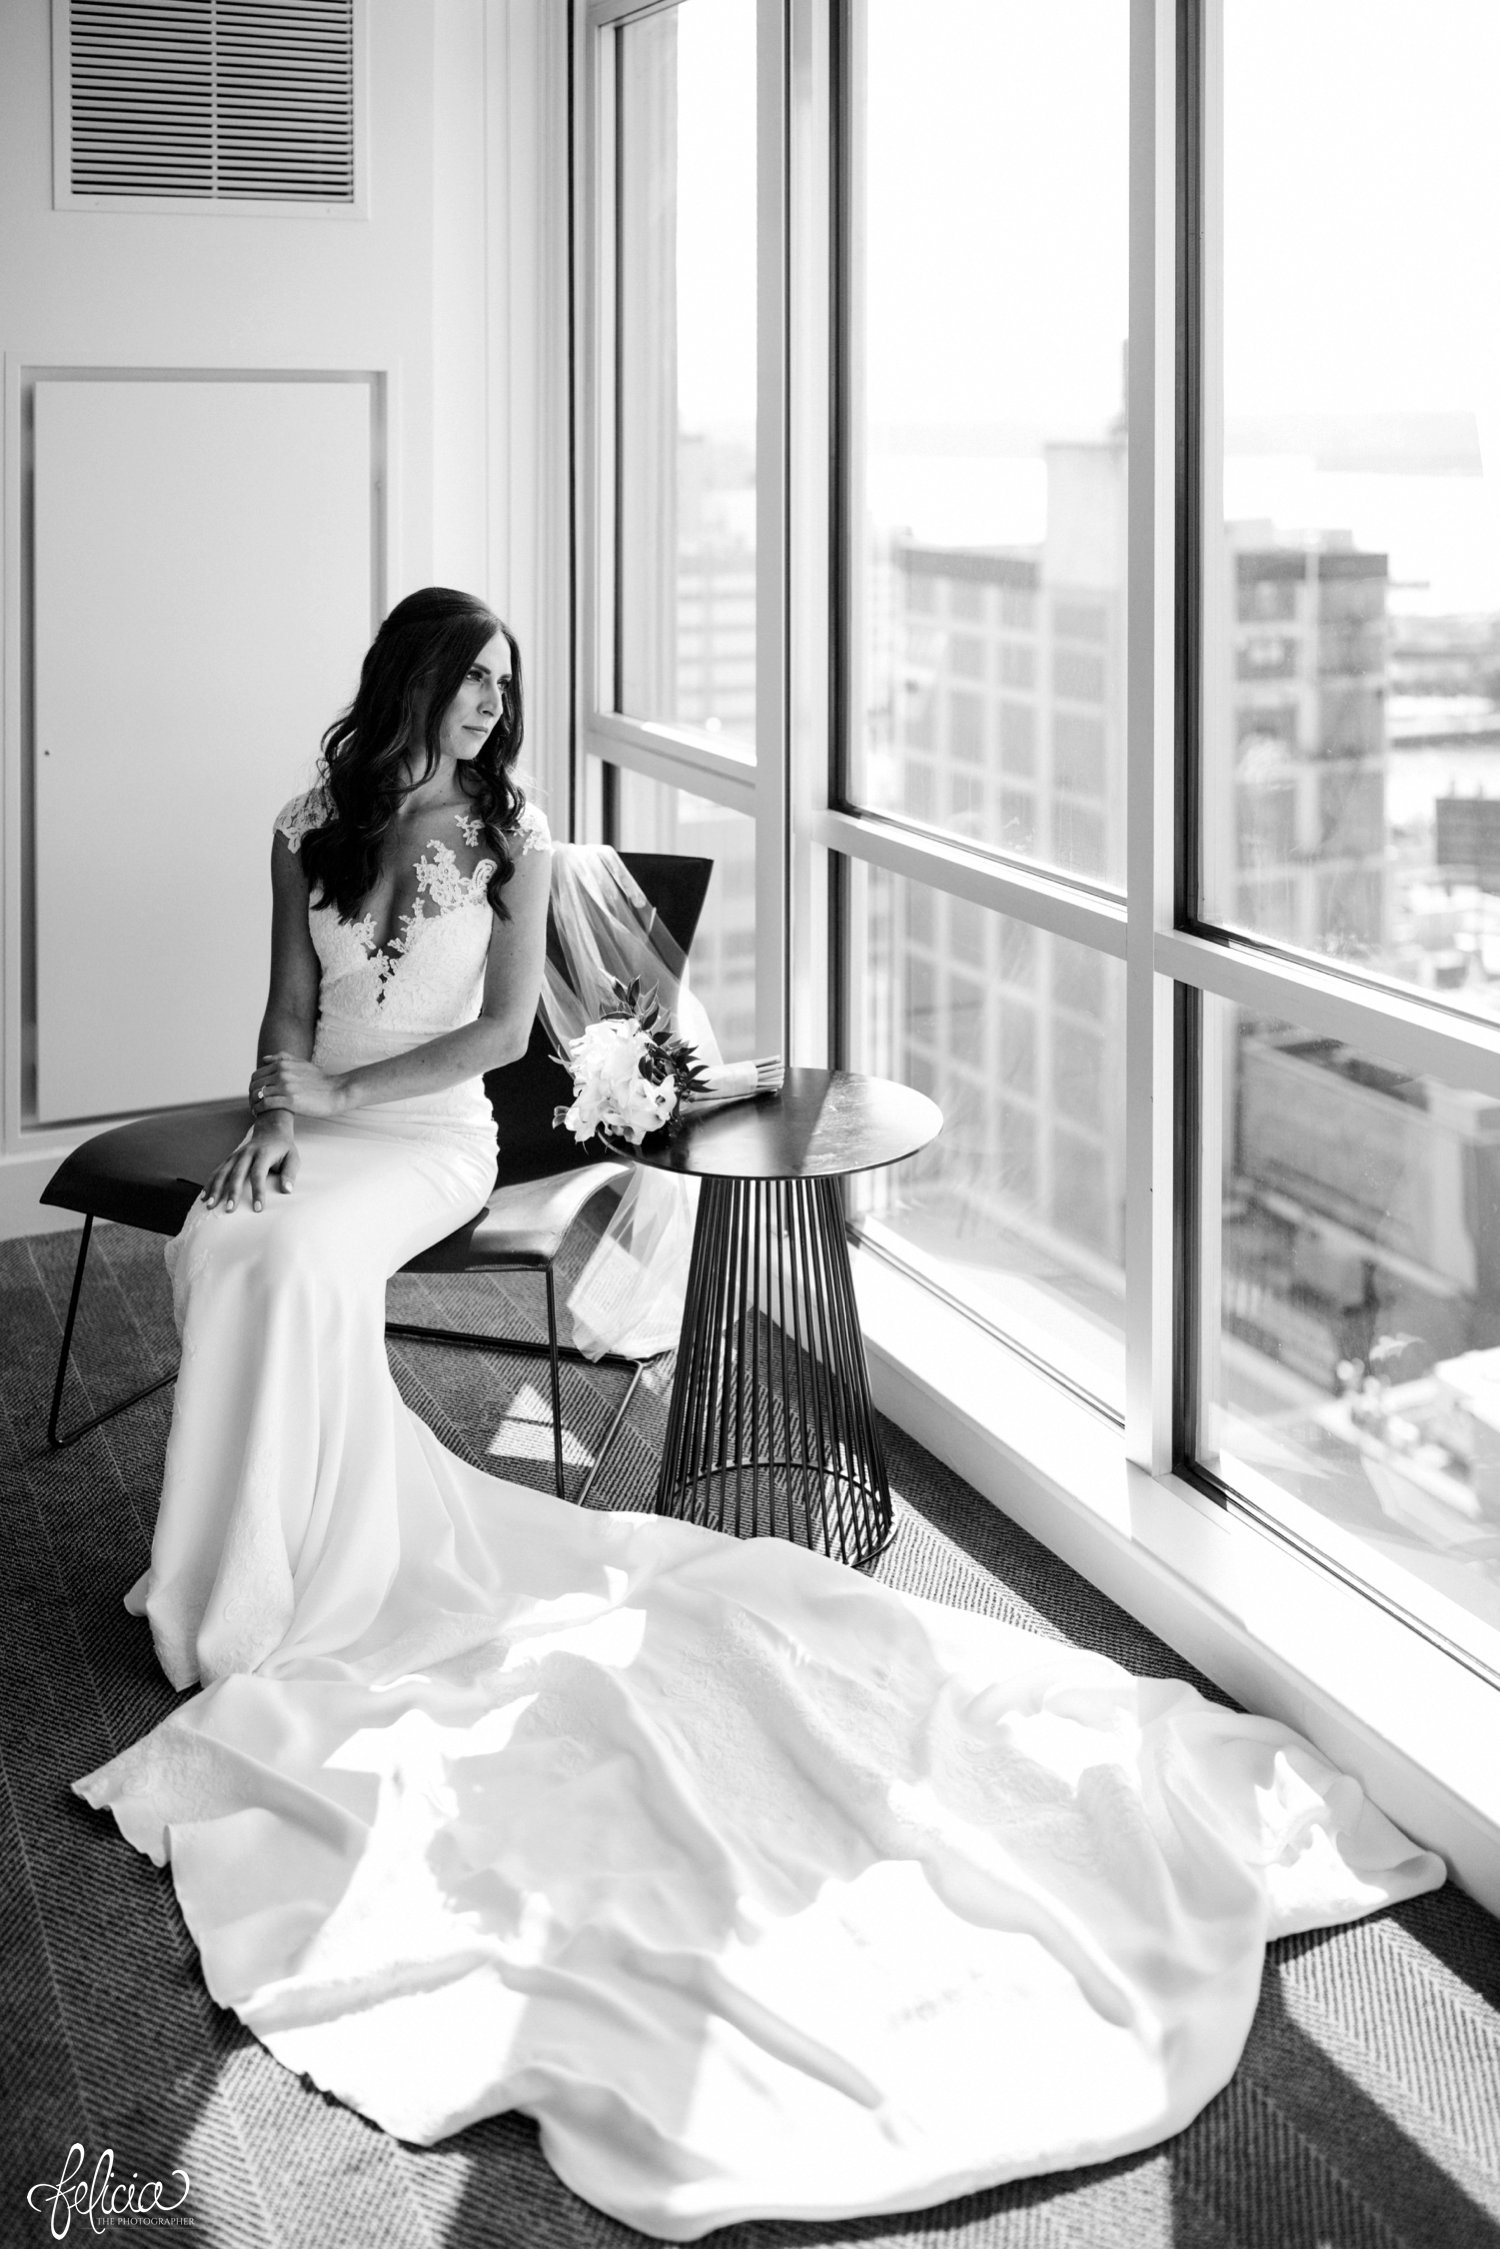 images by feliciathephotographer.com | destination wedding photographer | new york city | details | classic | shoes | pre ceremony | getting ready | kimpton ink48 hotel | putting on the dress | lace detail | open back | nordstrom | pronovias | long train | black and white | 